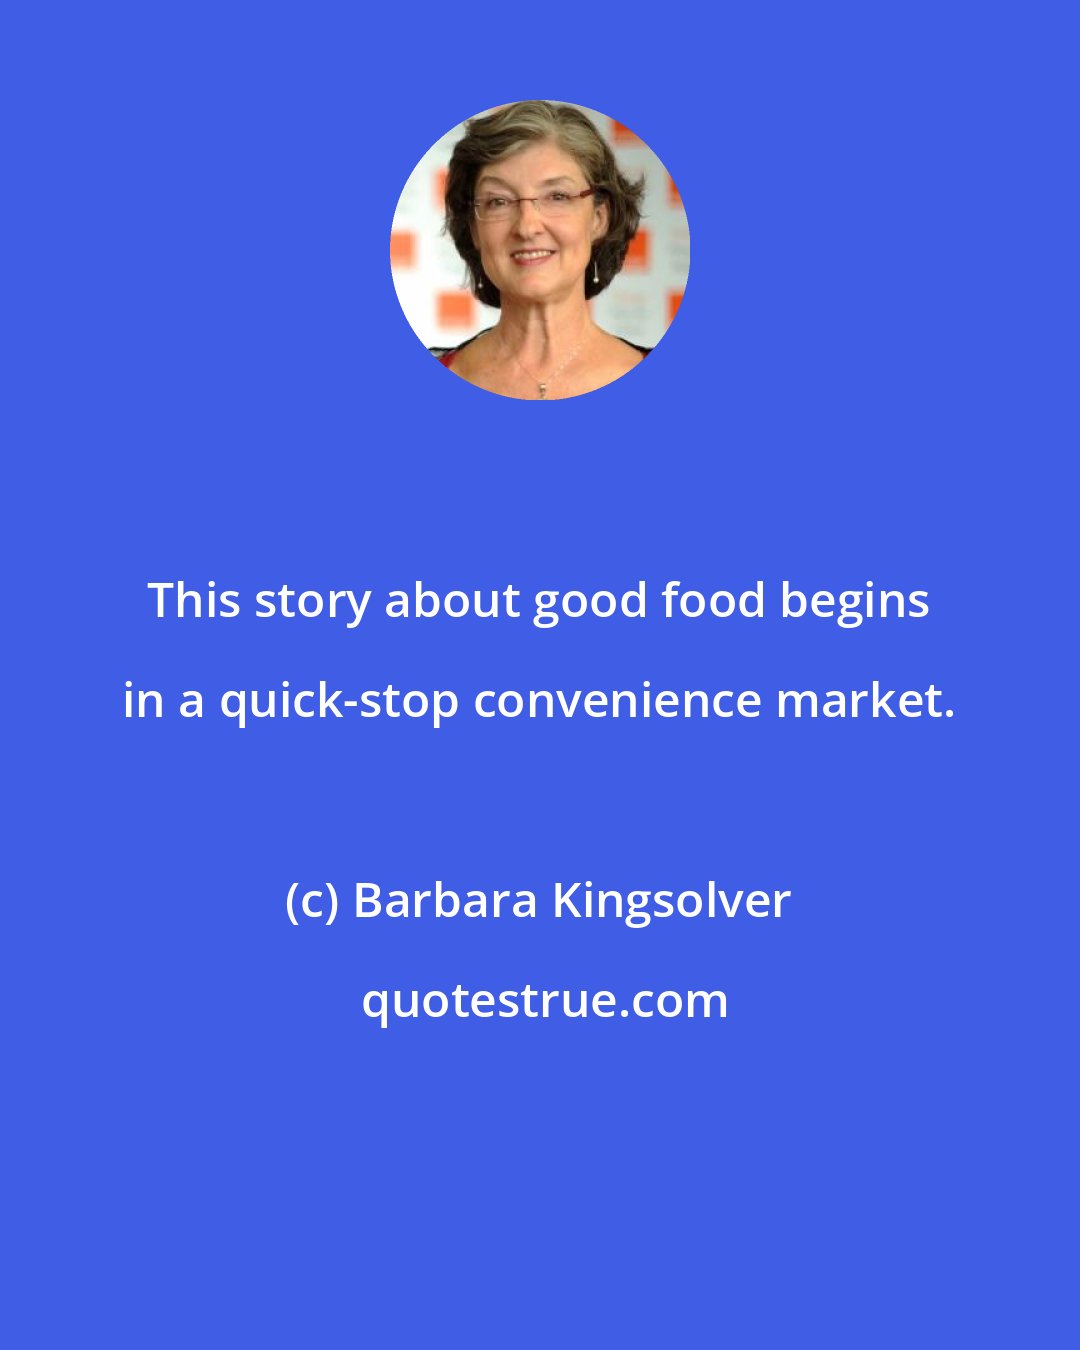 Barbara Kingsolver: This story about good food begins in a quick-stop convenience market.